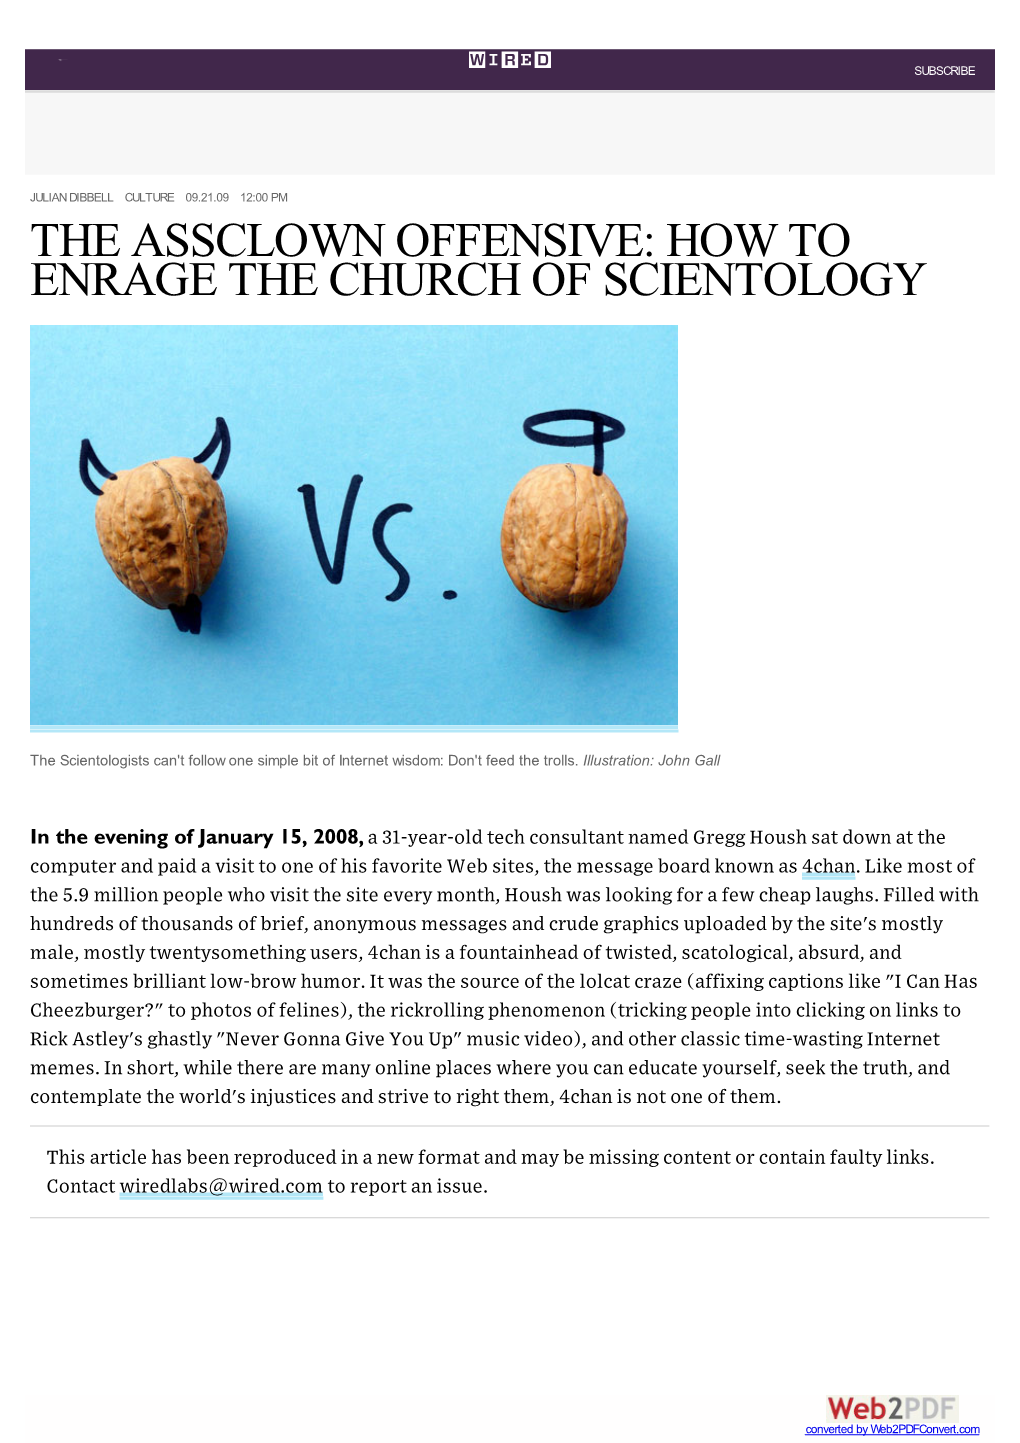 The Assclown Offensive: How to Enrage the Church of Scientology | WIRED